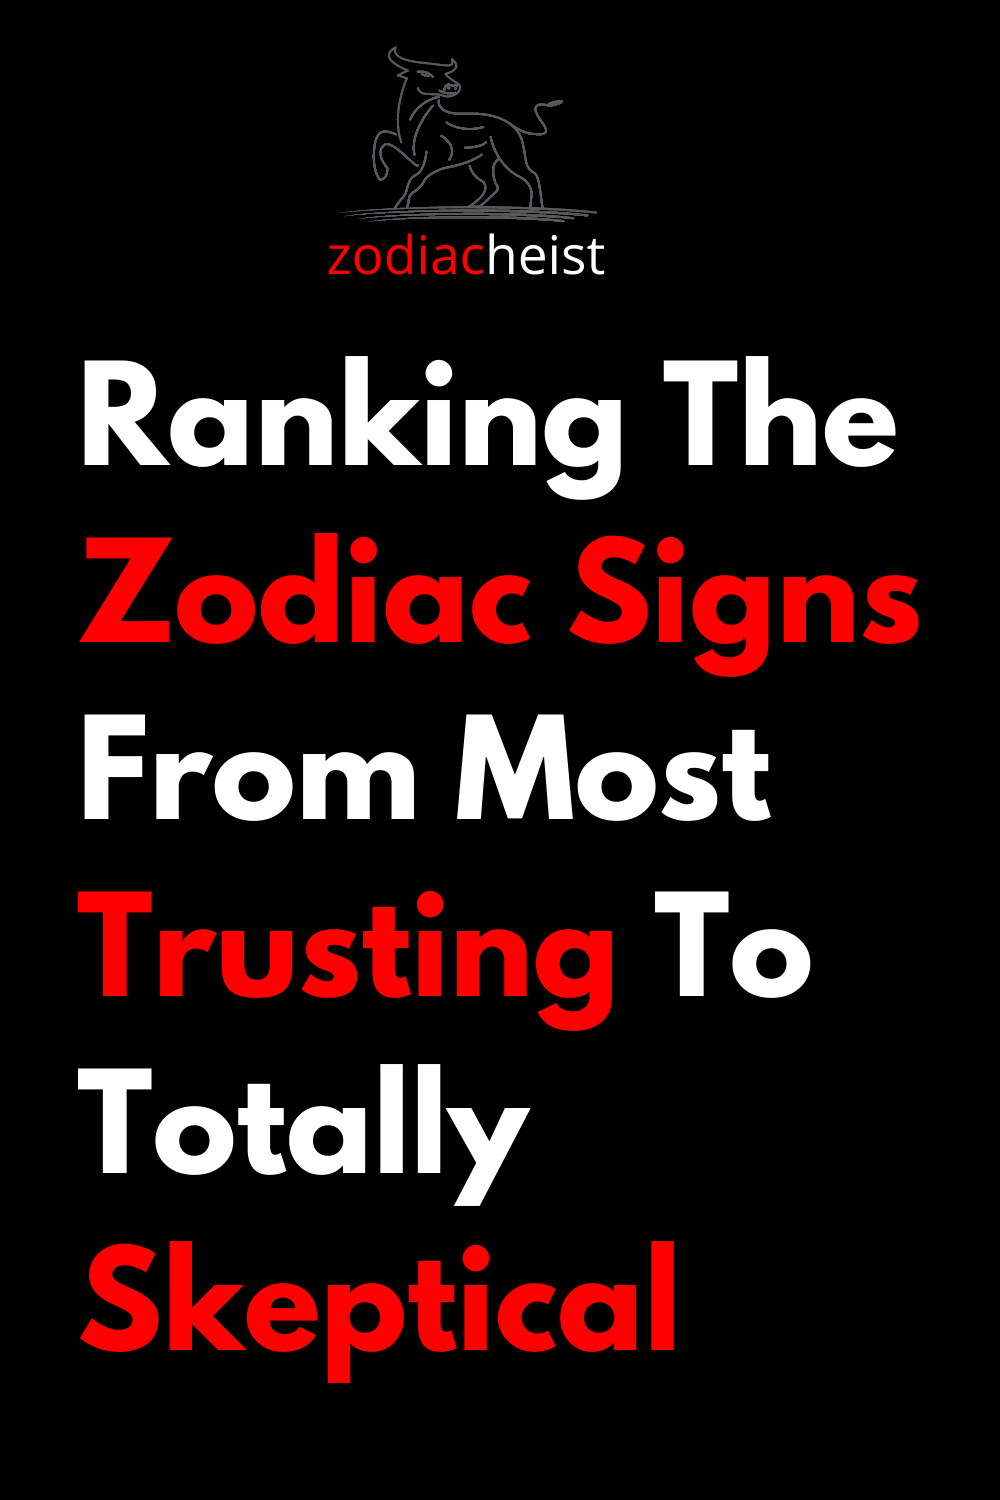 Ranking The Zodiac Signs From Most Trusting To Totally Skeptical